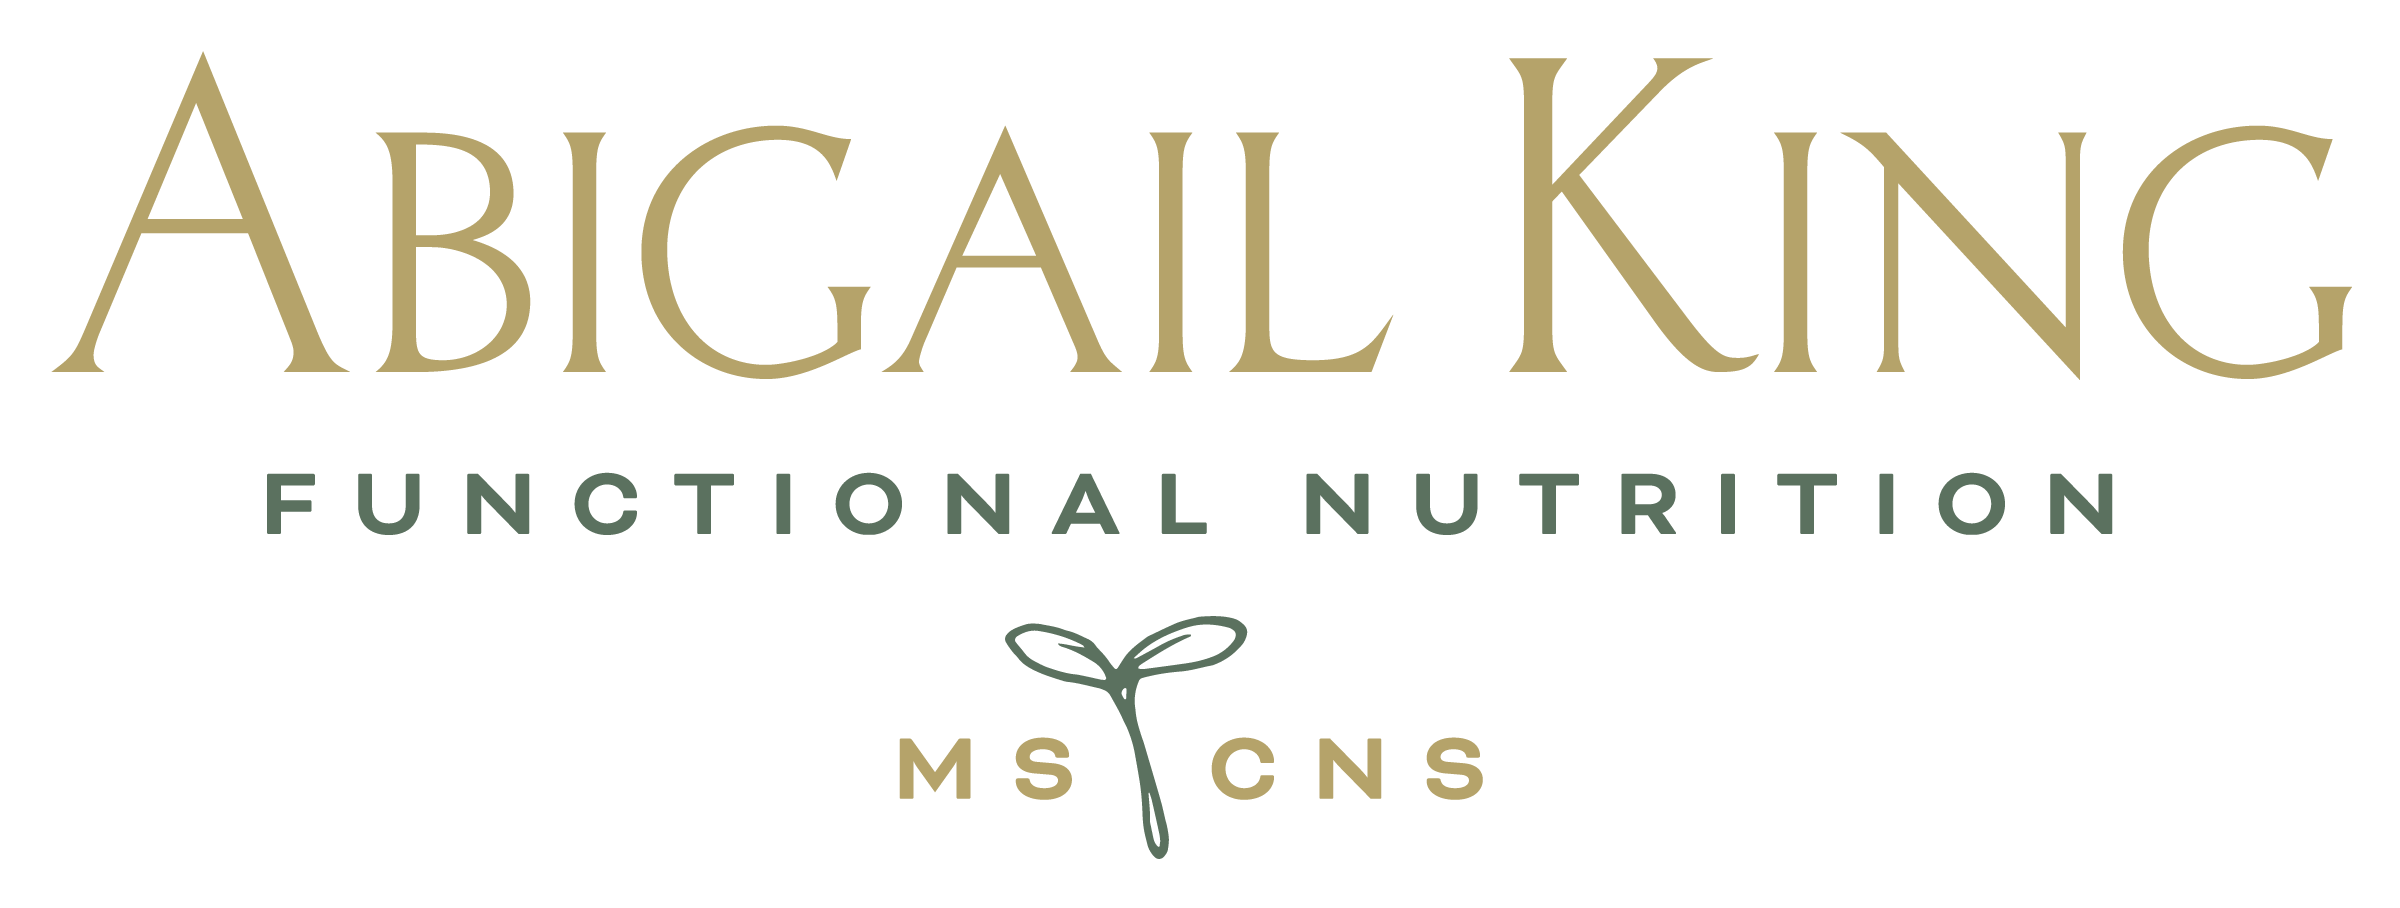 Abigail King Functional Nutrition